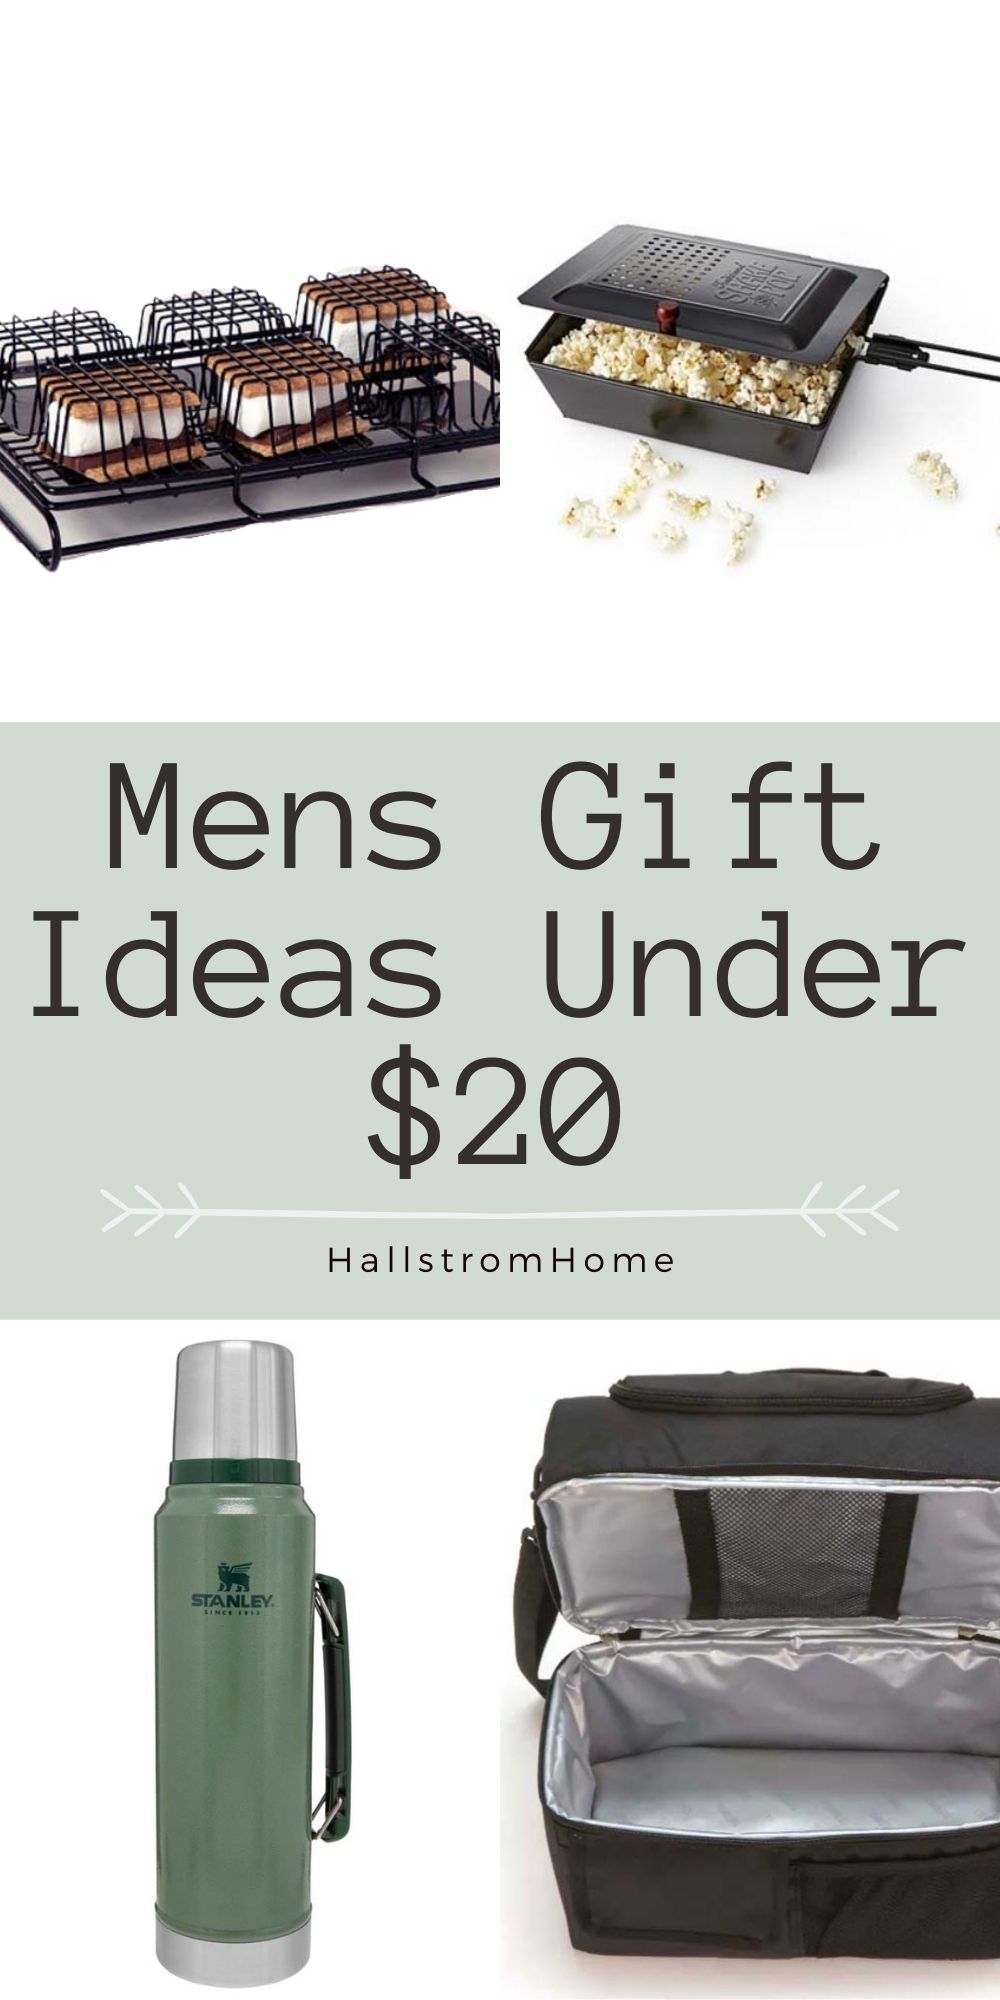 Gifts for men UK: Best gift ideas for the man in your life | Mashable